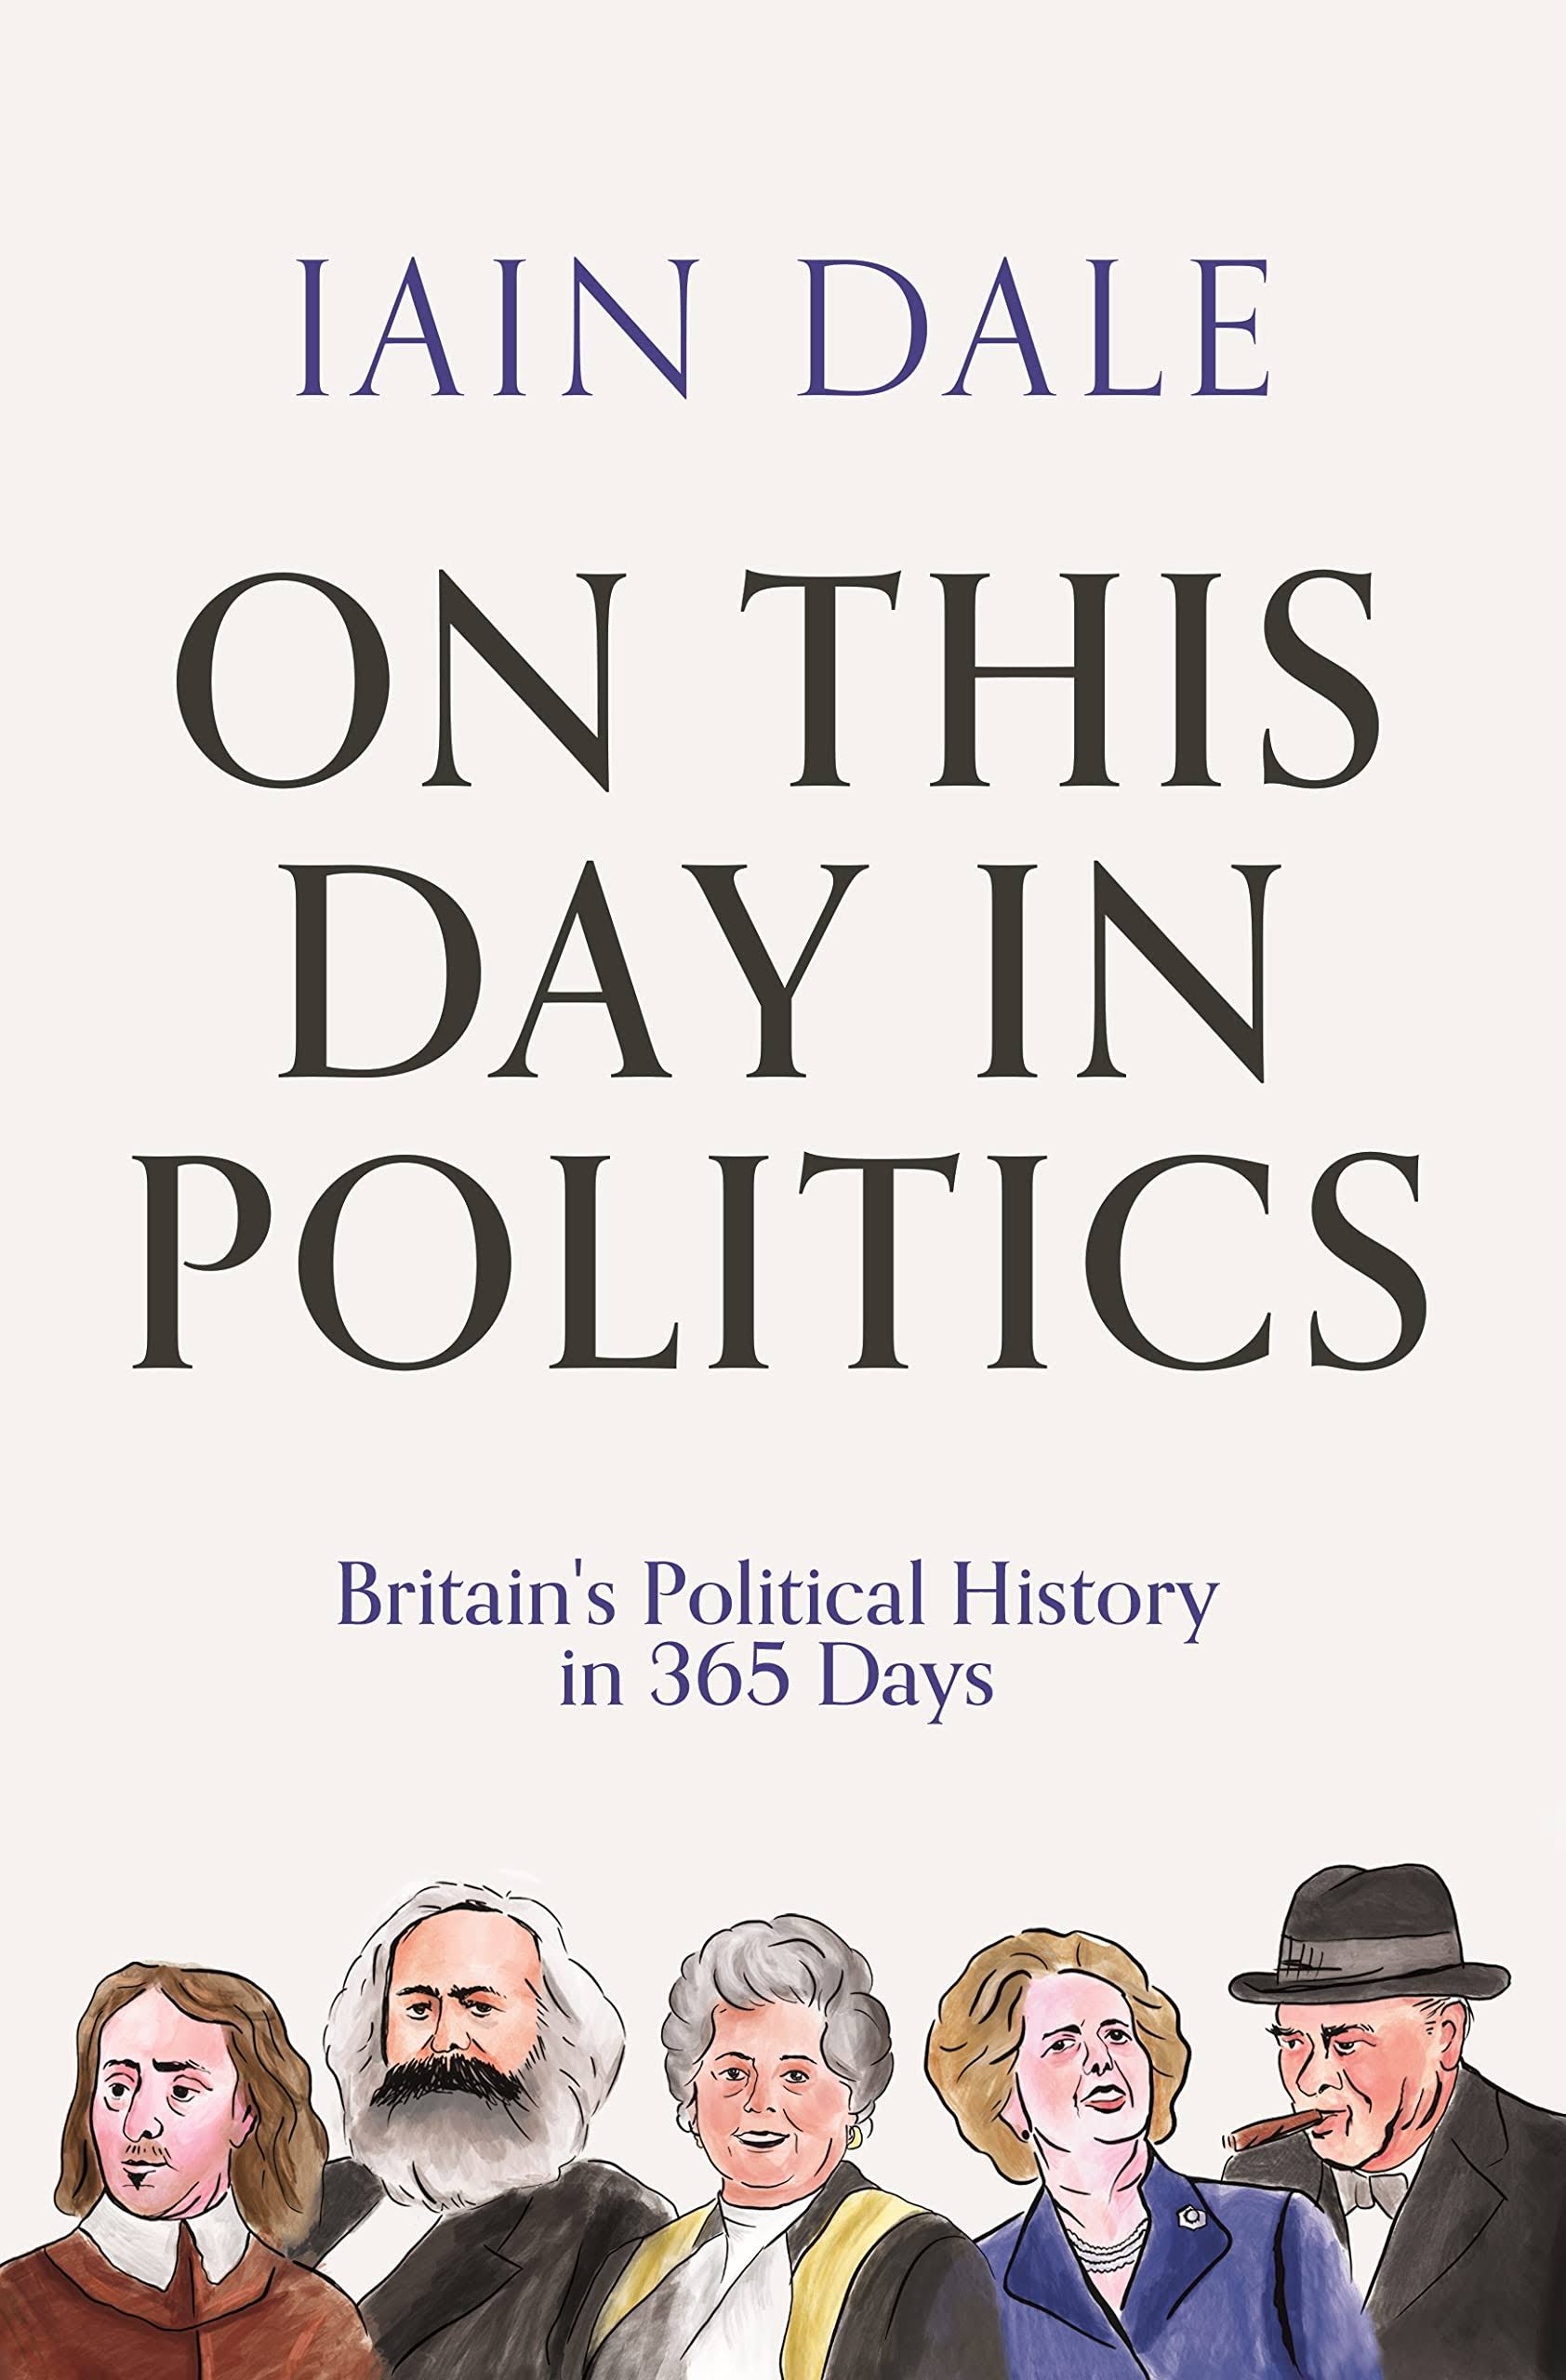 On This Day in Politics: Britain's Political History in 365 Days [Book]